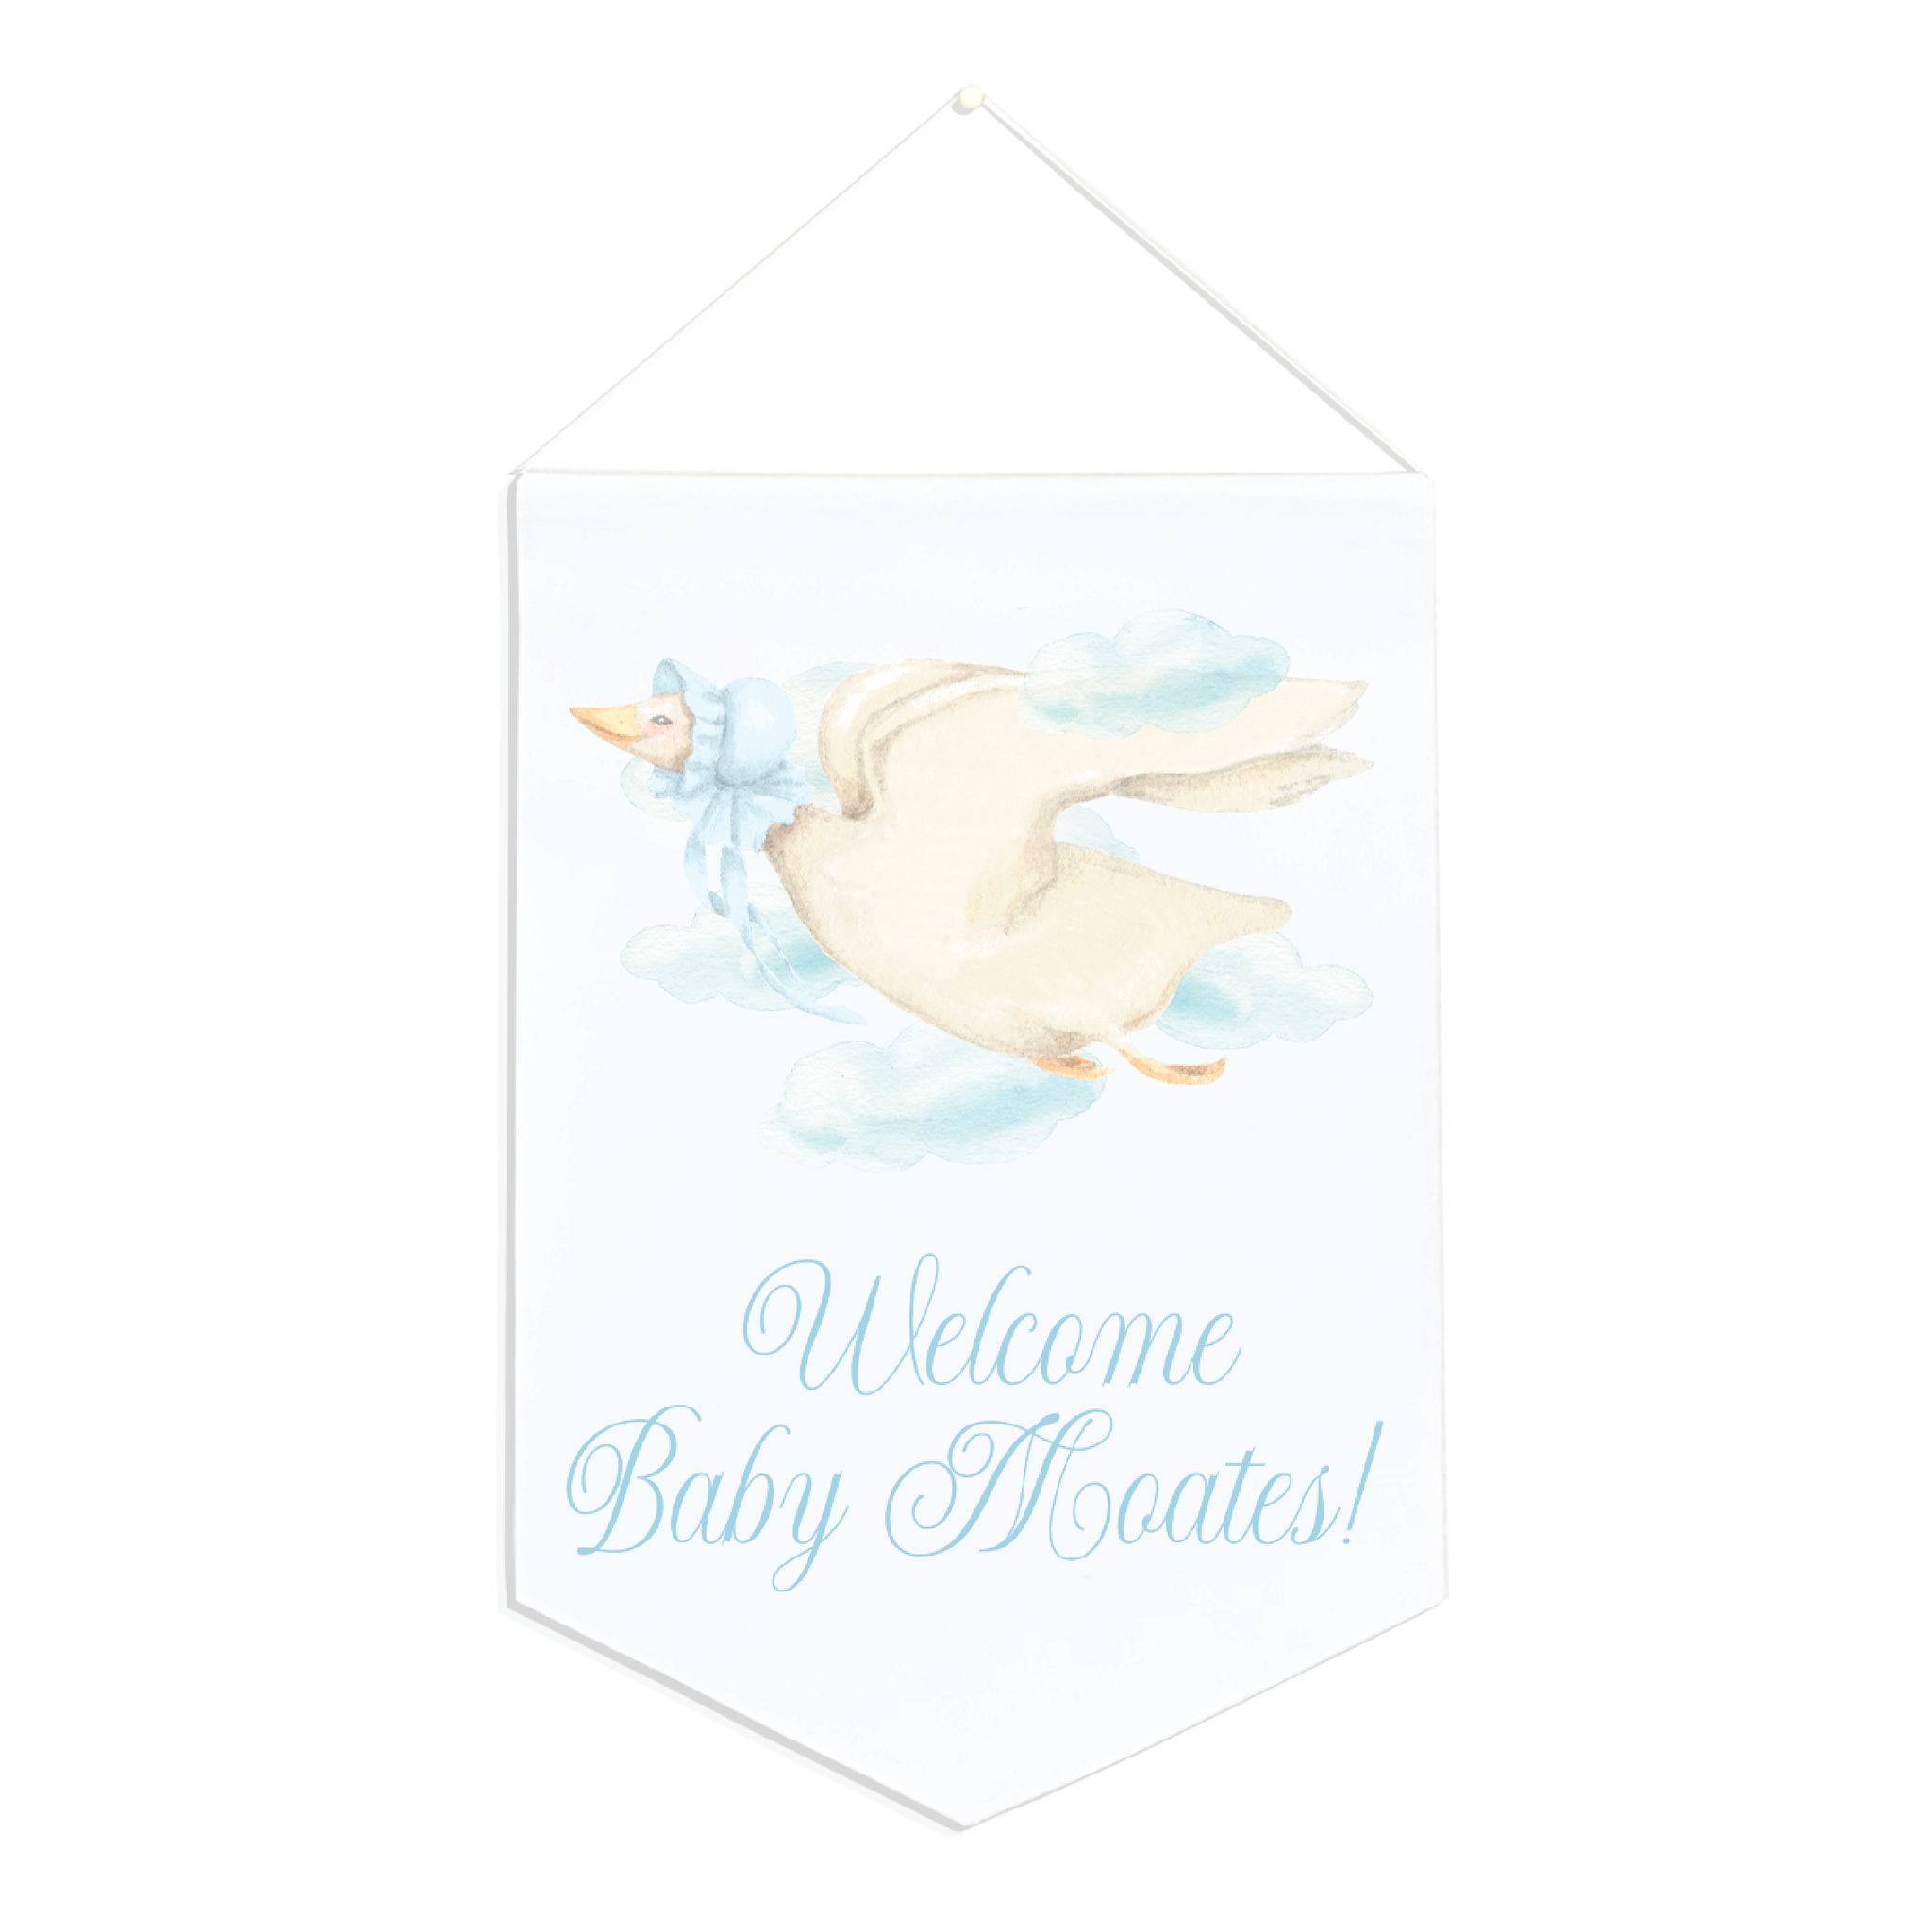 Mother Goose Blue Canvas 12x16.5 Personalized Baby Banner